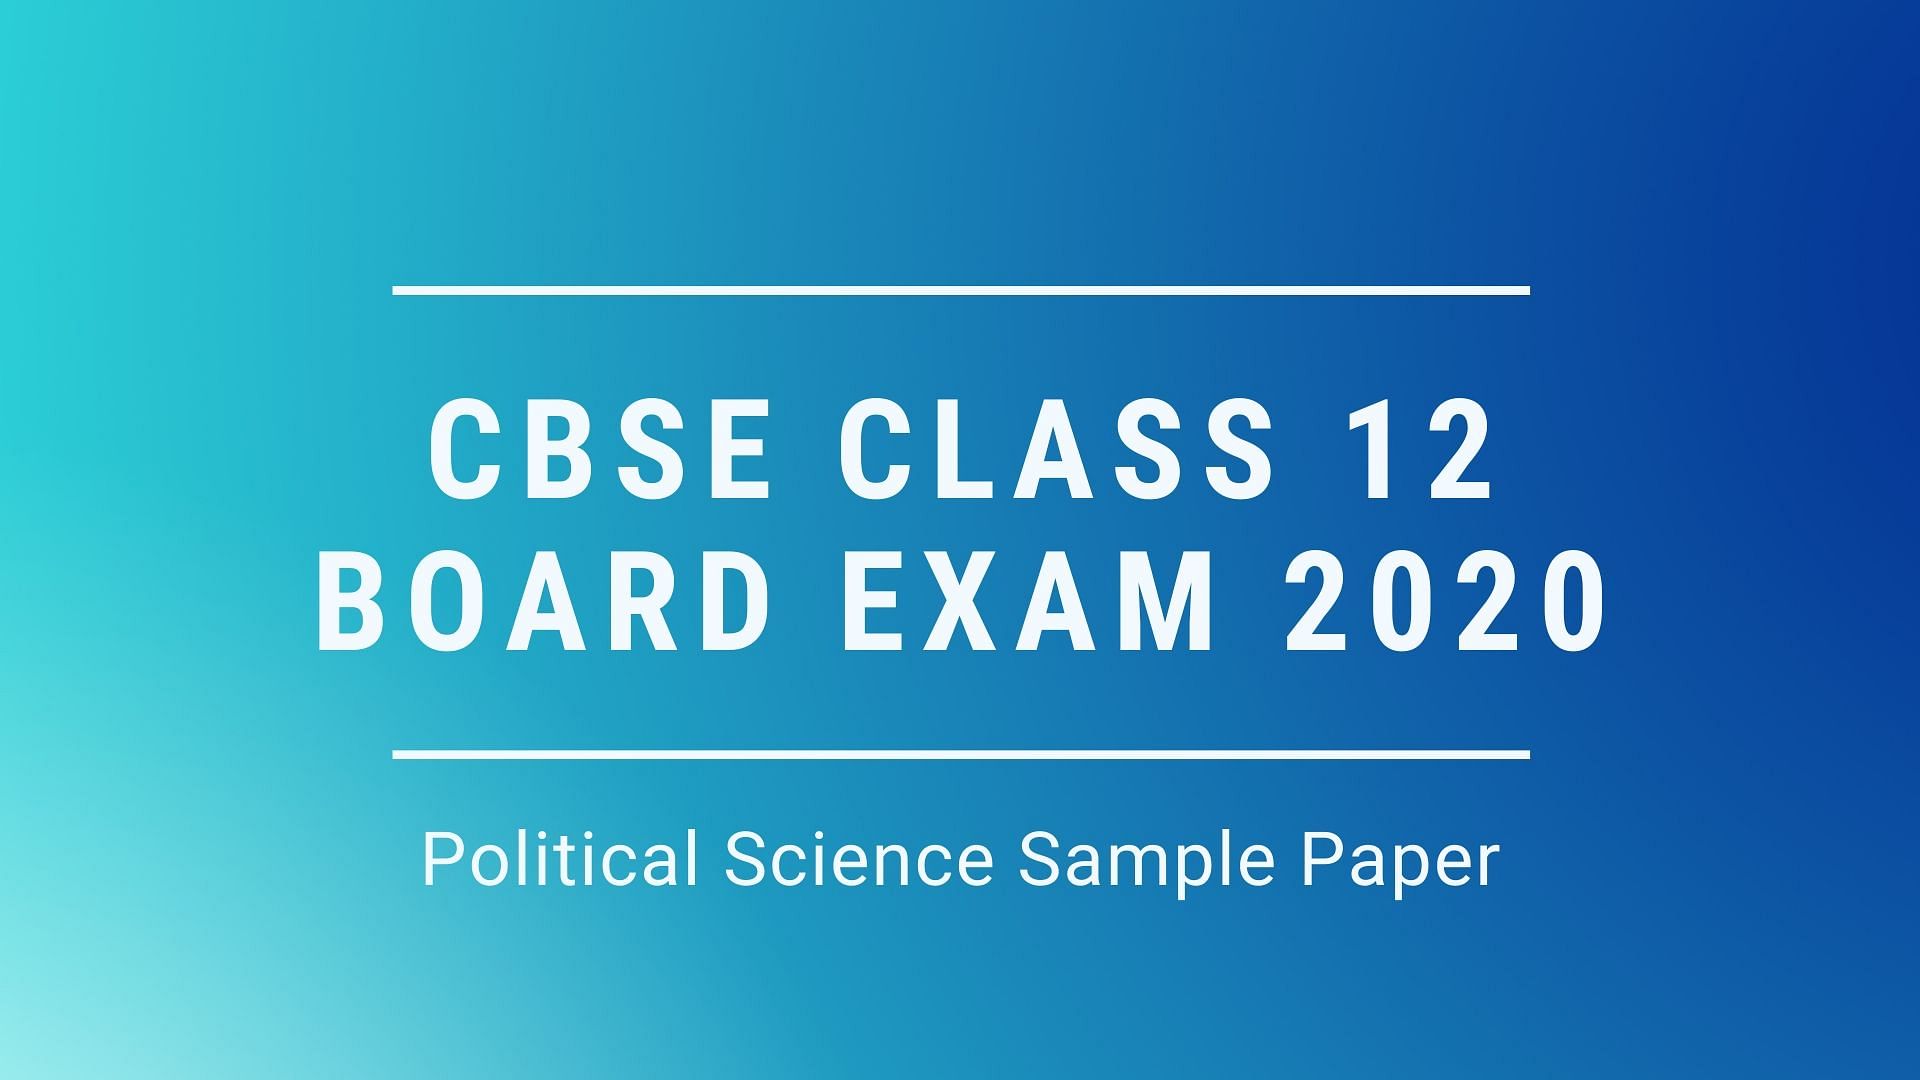 Check and Download CBSE 2020 Class 12 Political Science Sample Paper